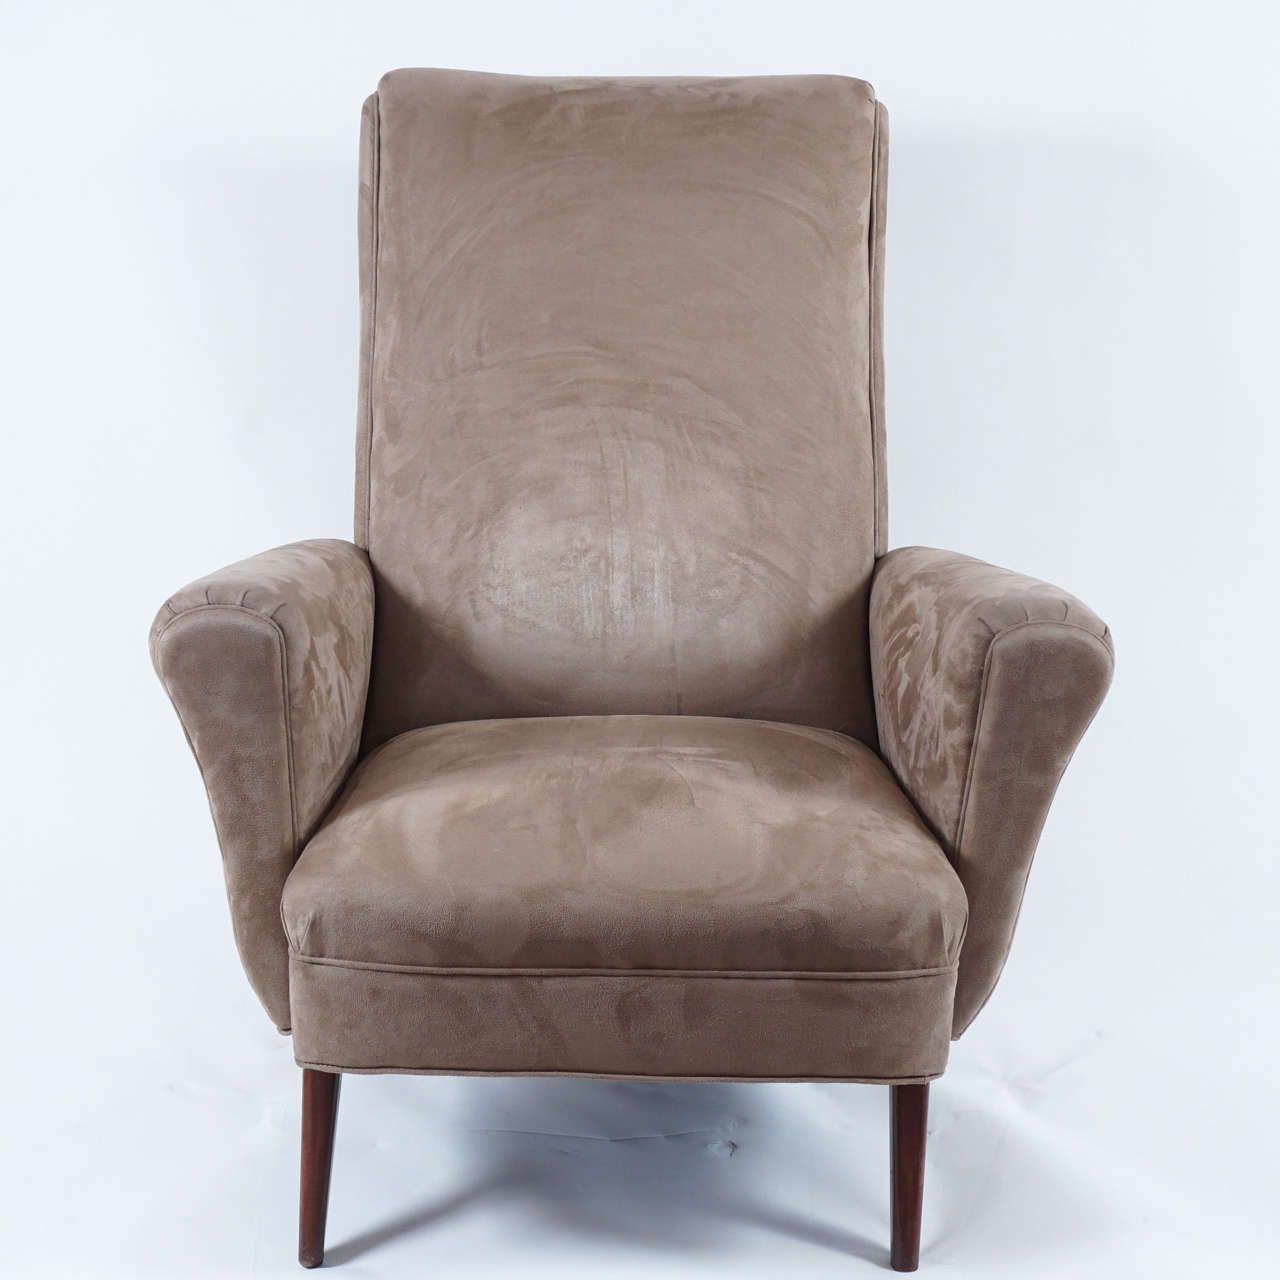 These wonderful chairs are as comfortable as they beautiful. Great form and somewhat recent re-upholstery in a rich tan/taupe ultrasuede enhance the appeal of these lounge chairs. Likely of French origin in the 1940s, with walnut legs that provide